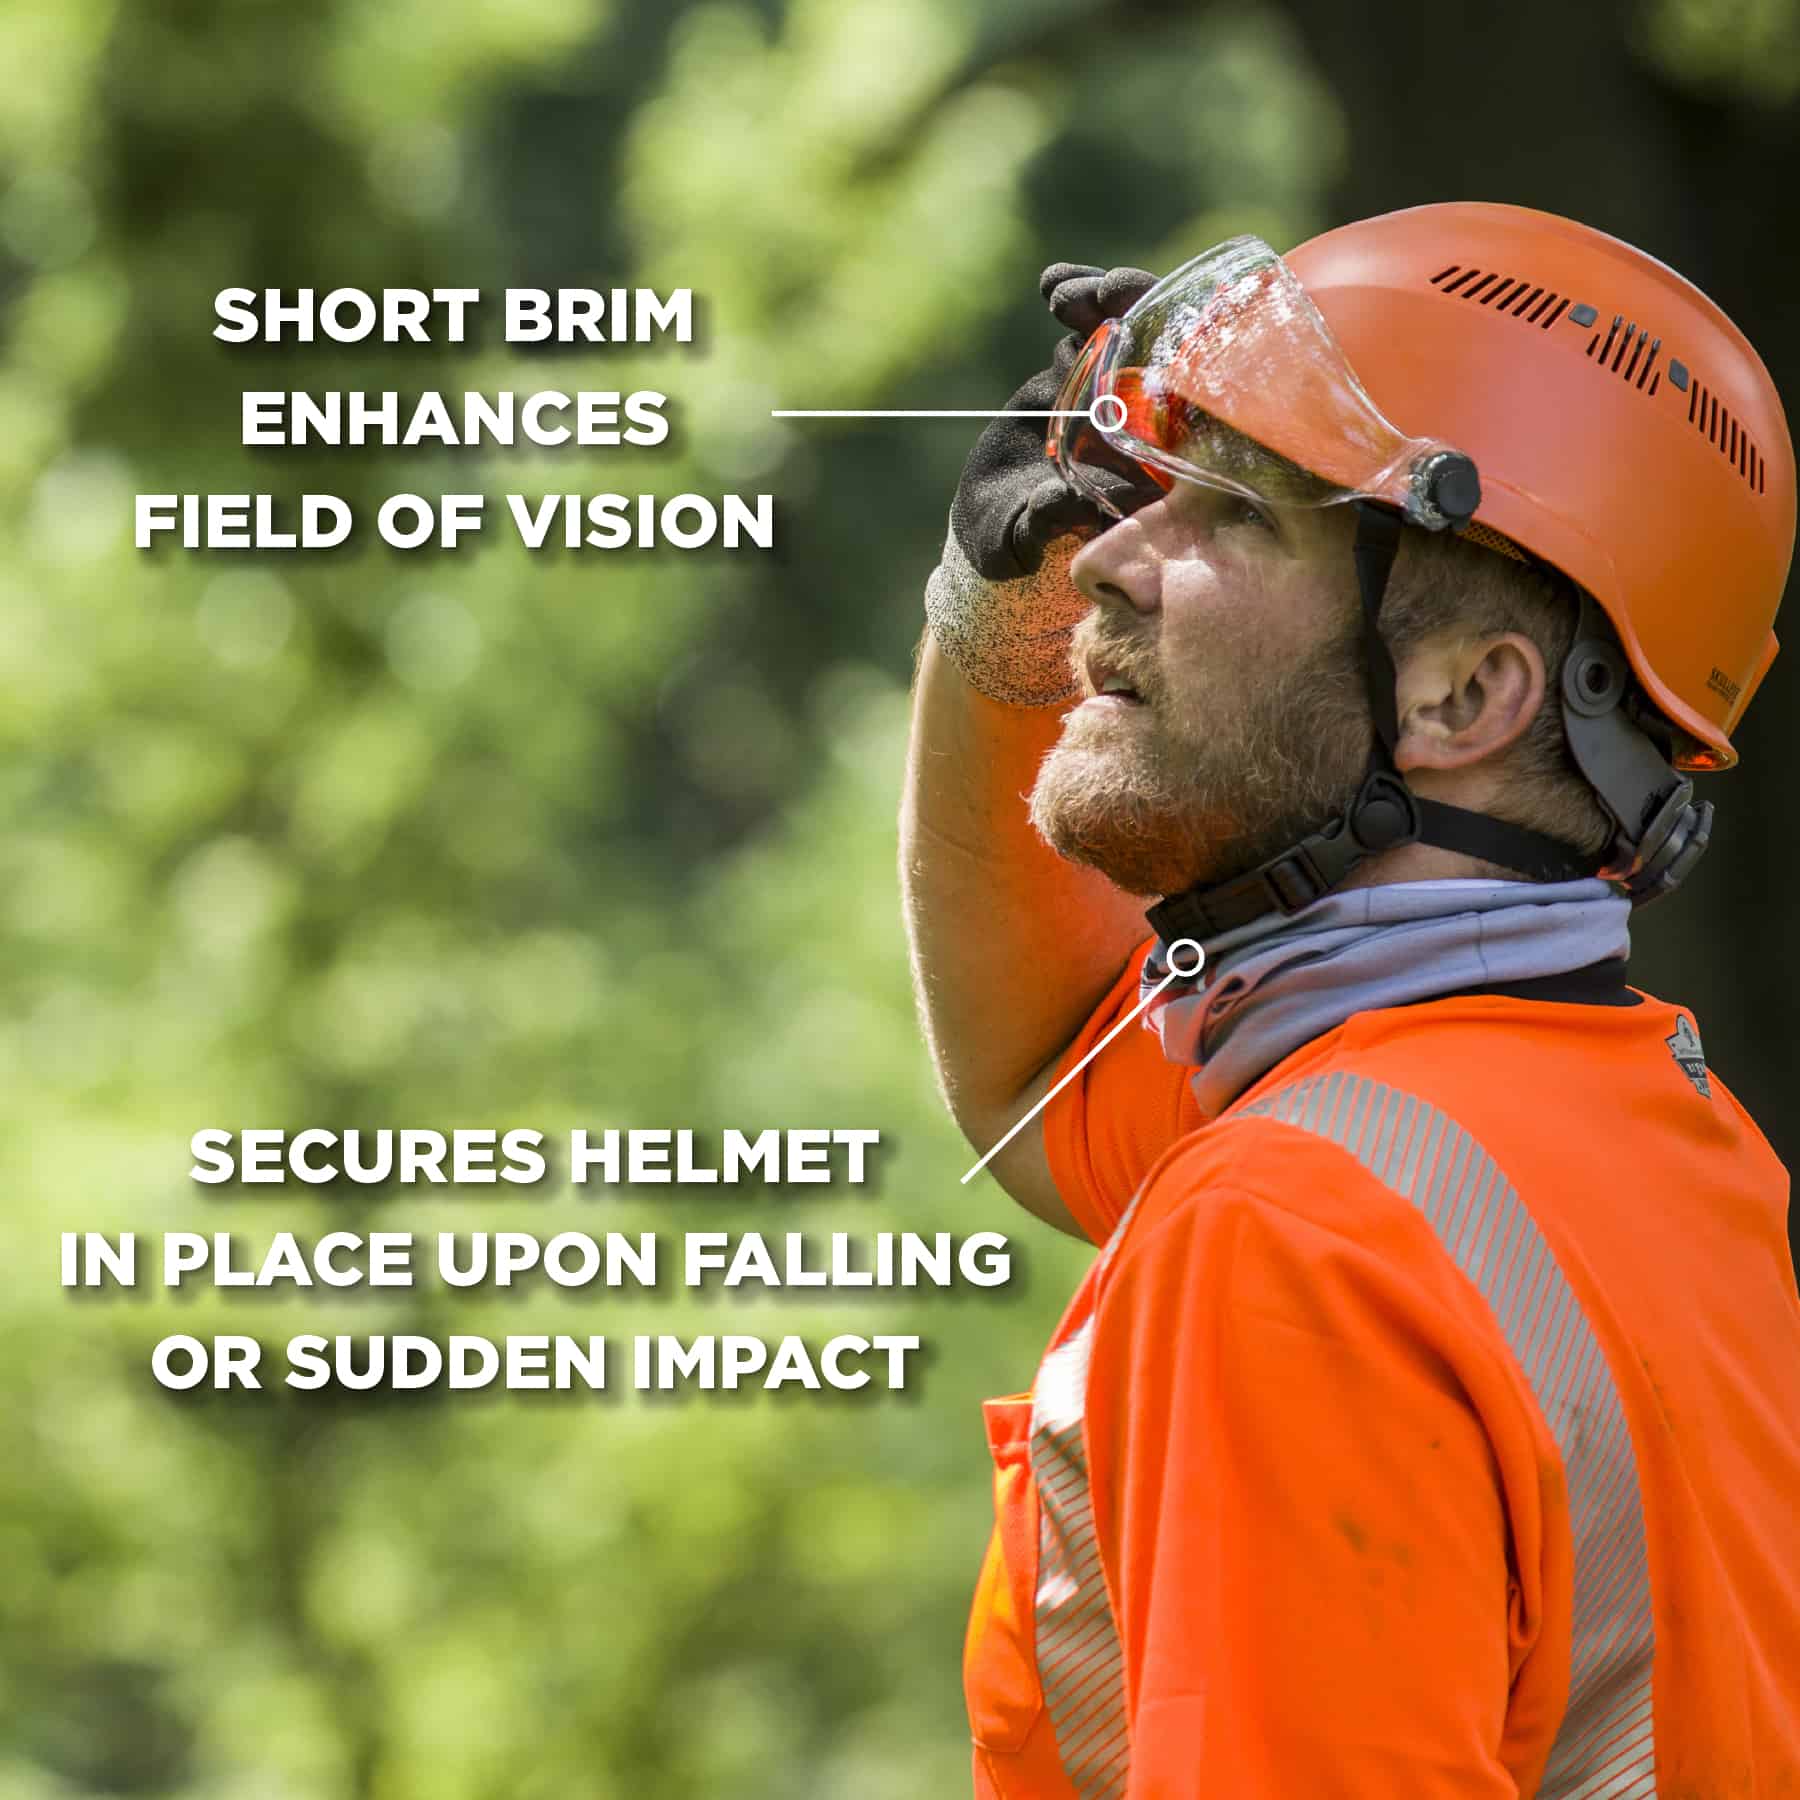 Person lifting visor off of helmet. Short brim enhances field of vision. Secures helmet in place upon falling or sudden impact.